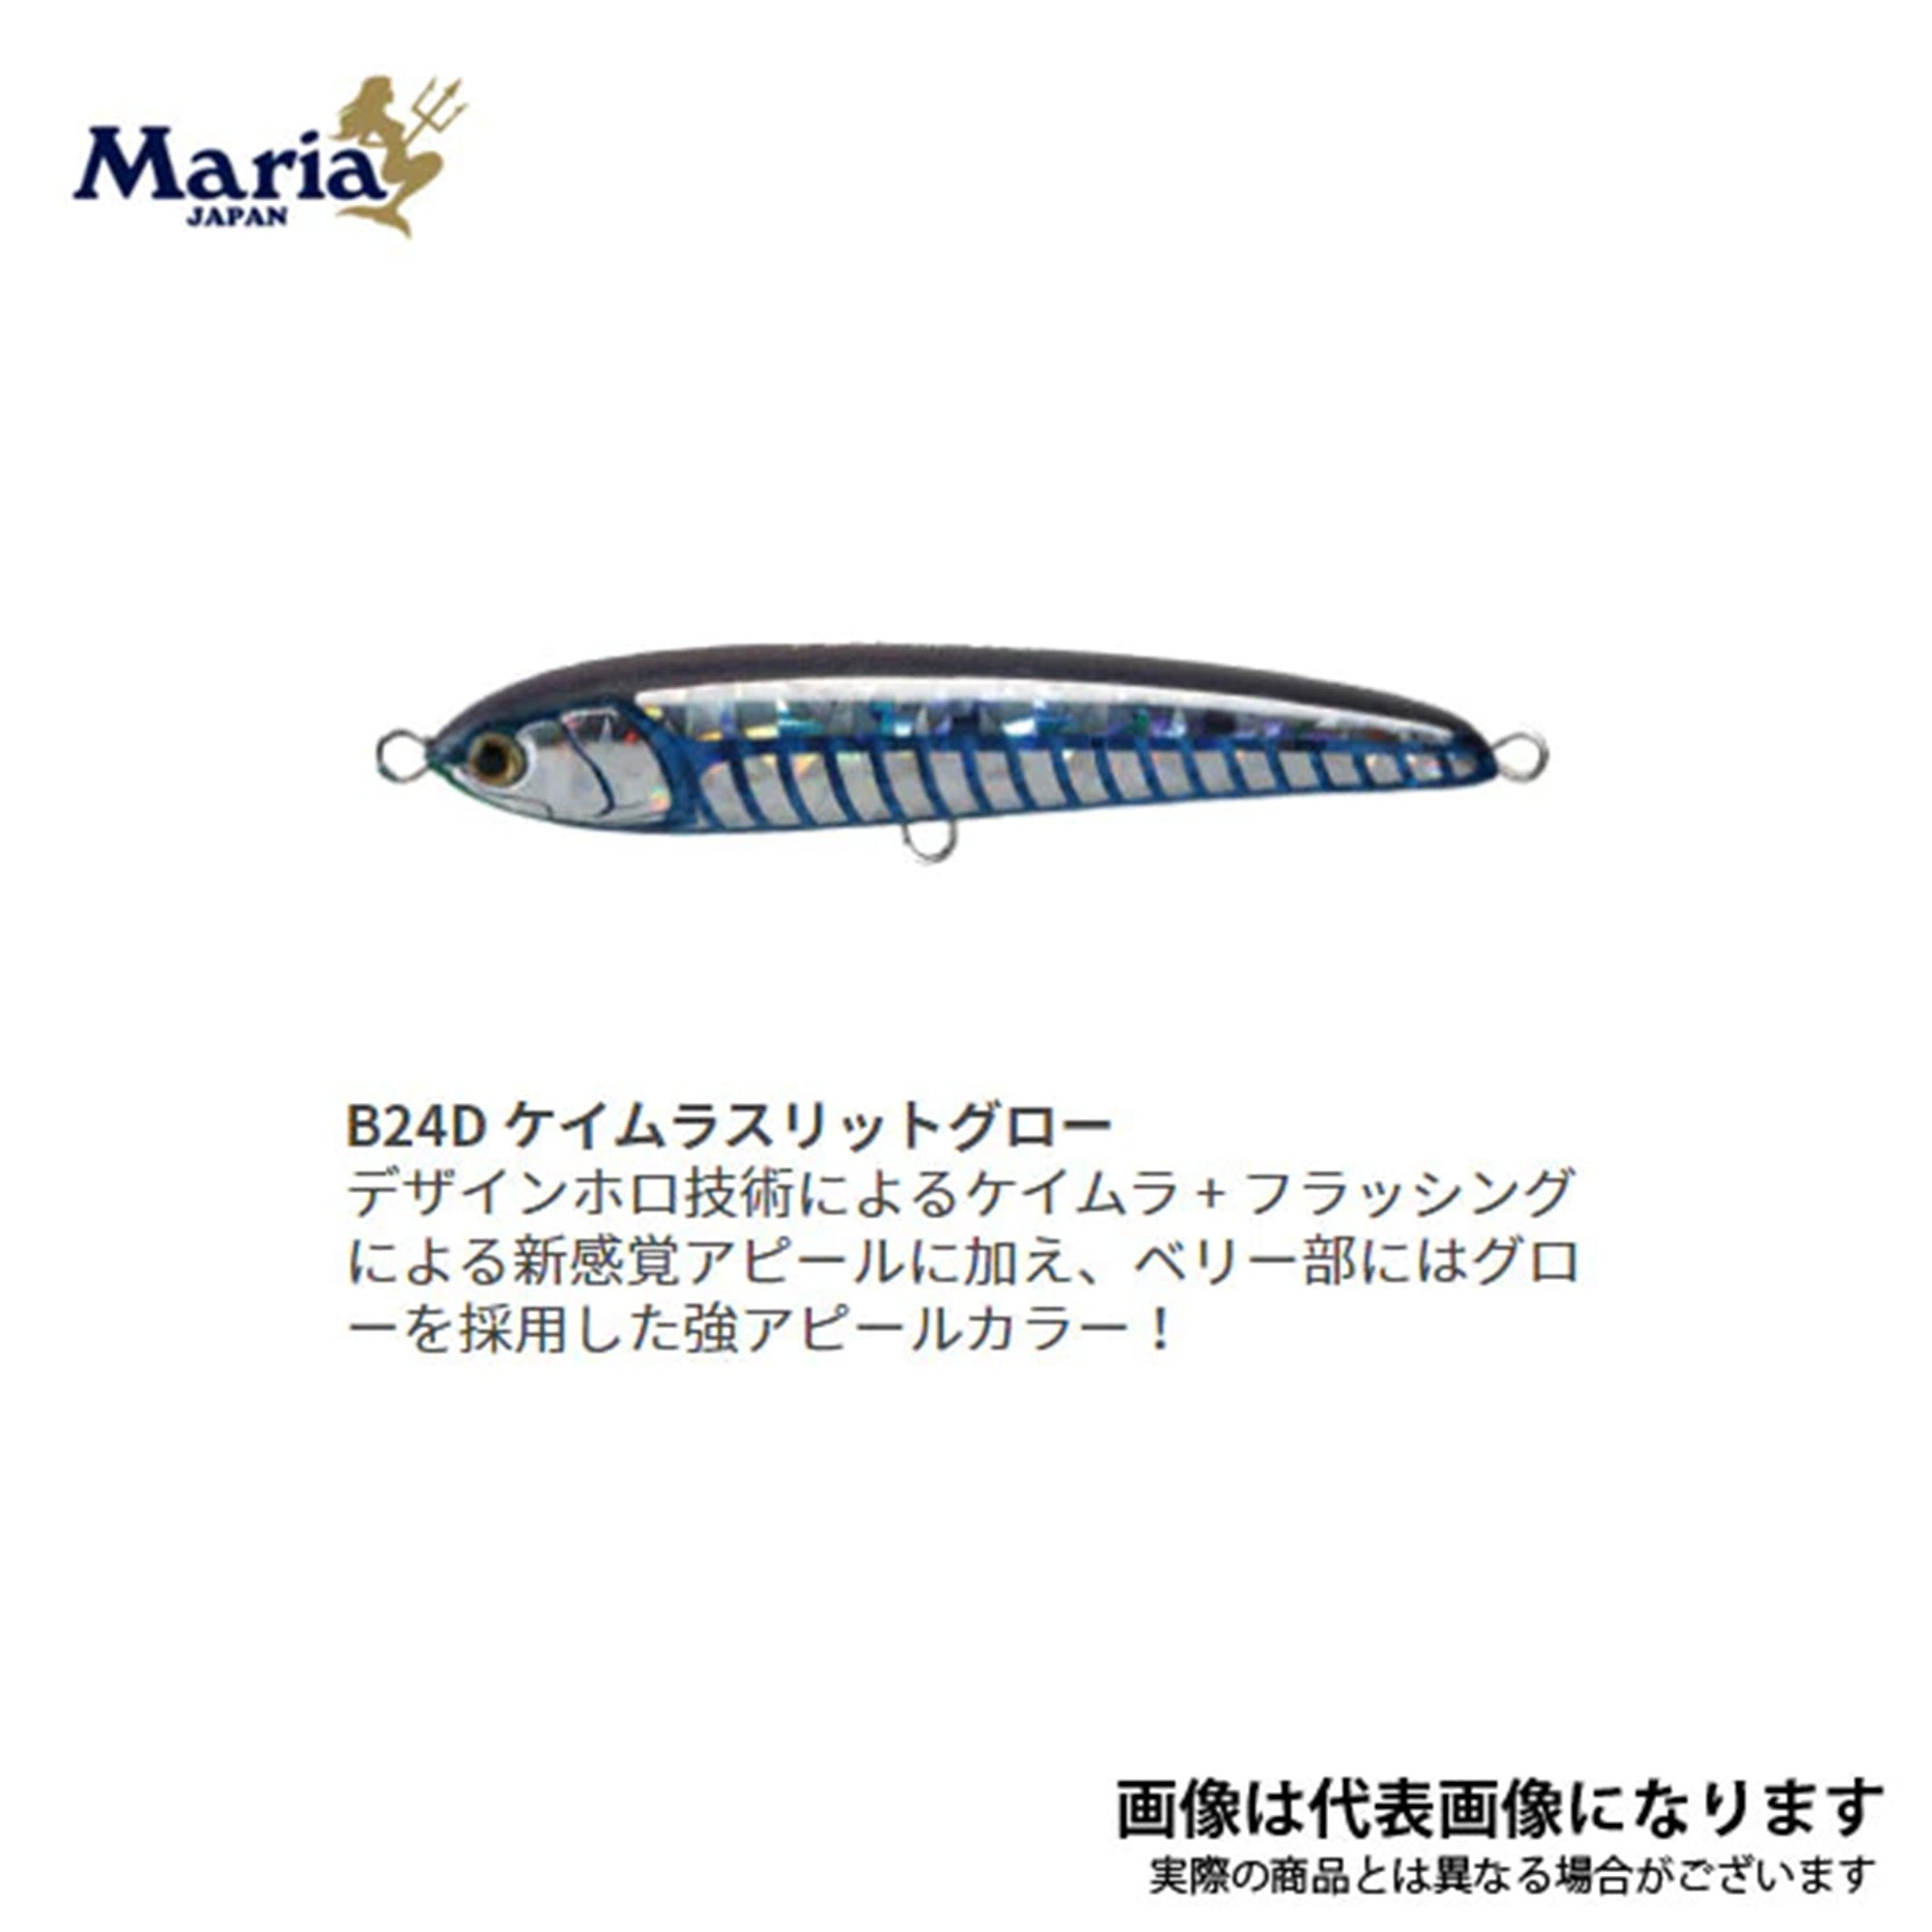 Maria/ラピード F130 – SEASAW-ONLINE